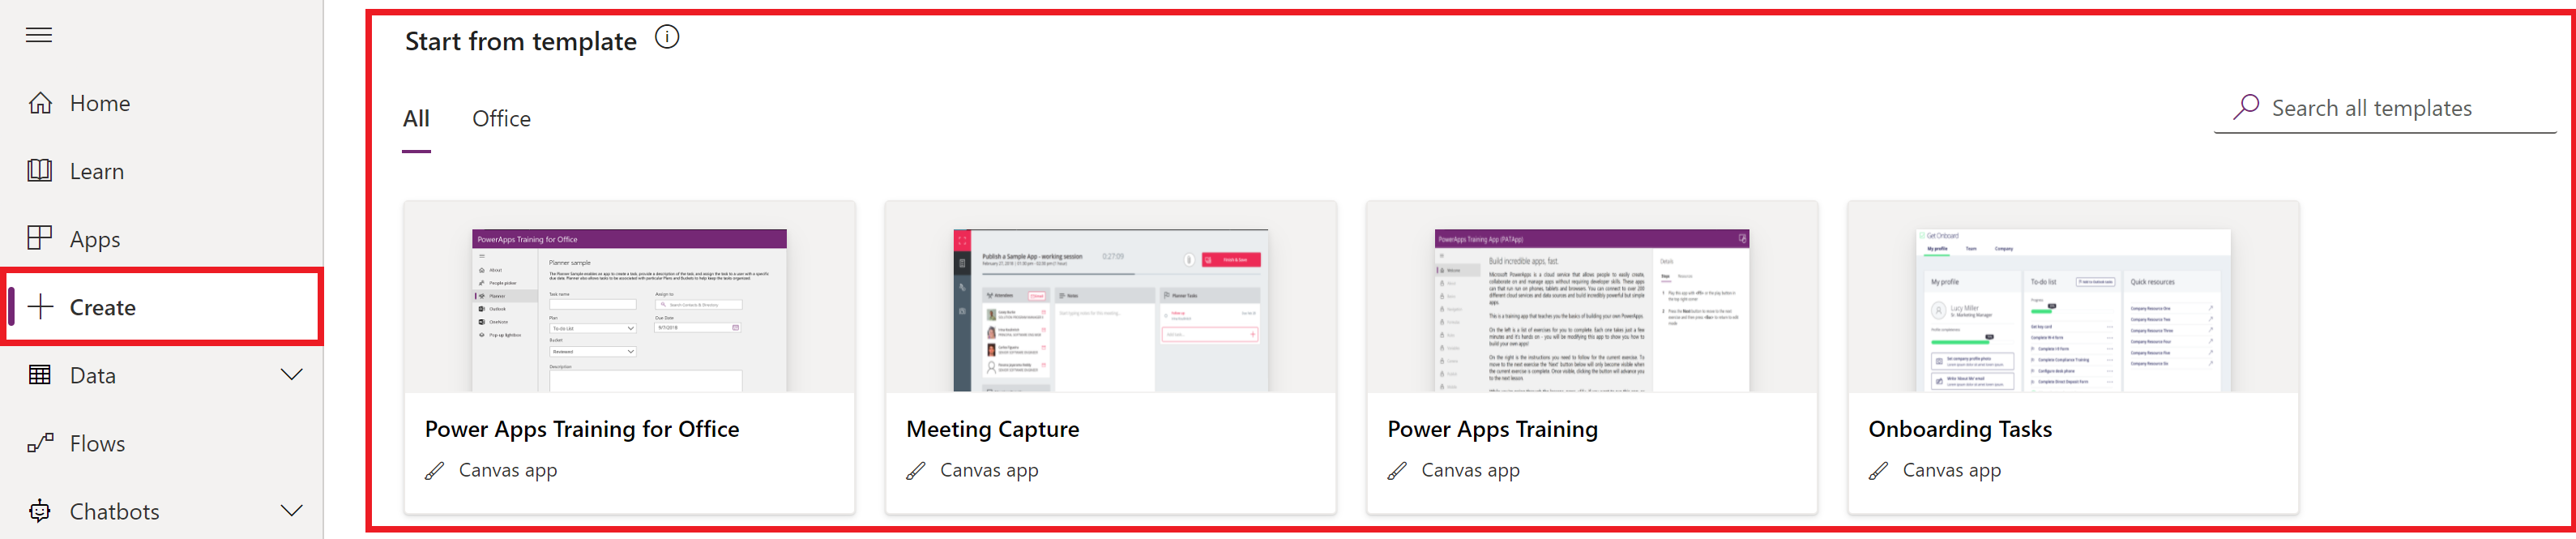 Power Apps-websted.